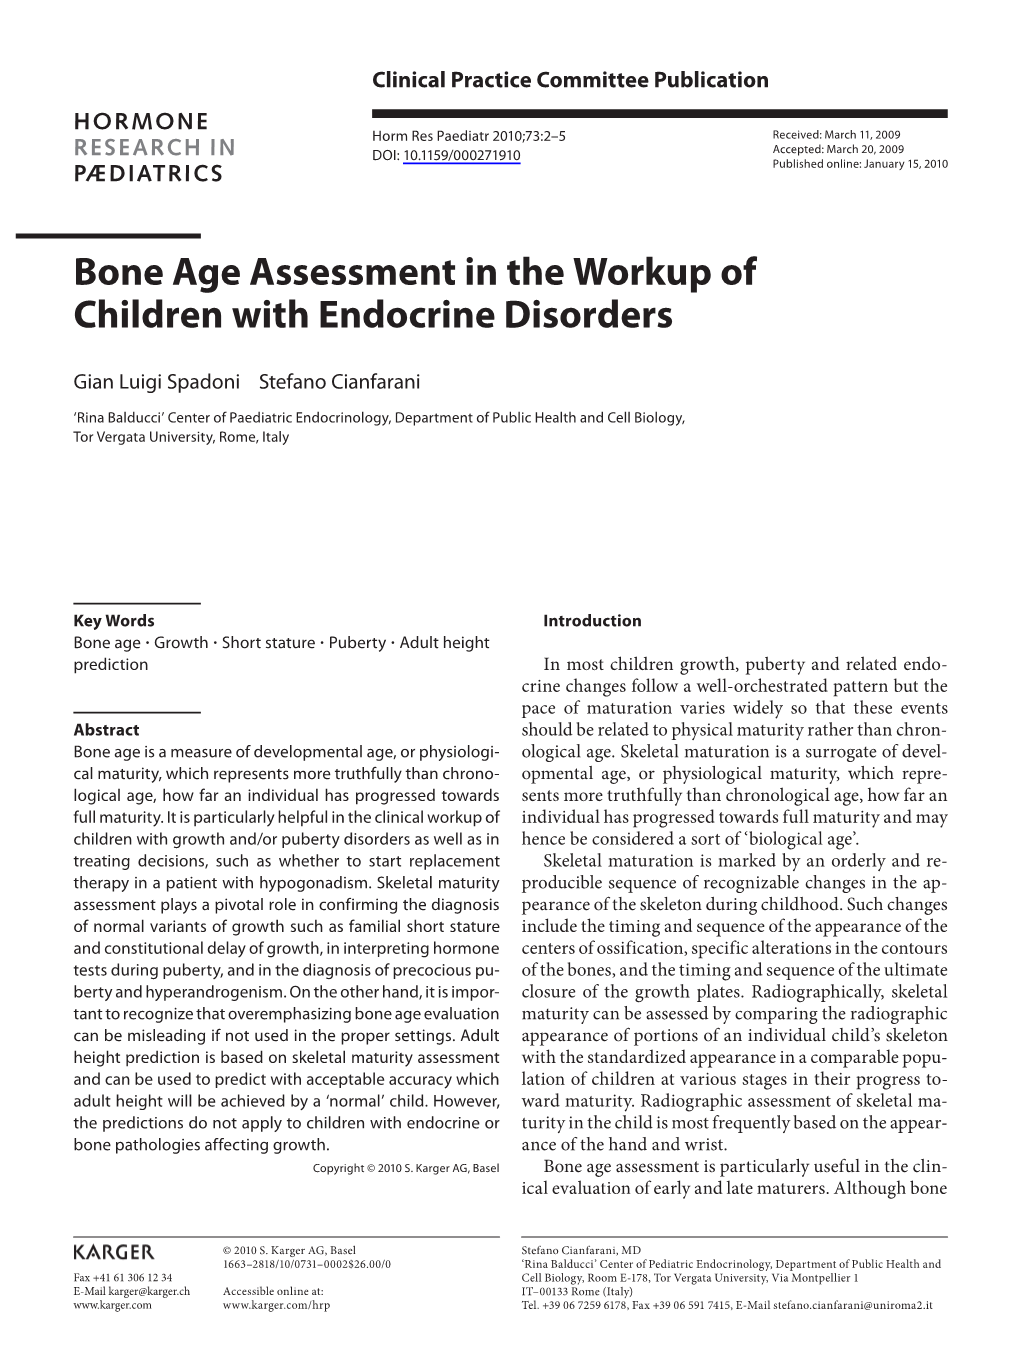 Bone Age Assessment in the Workup of Children with Endocrine Disorders